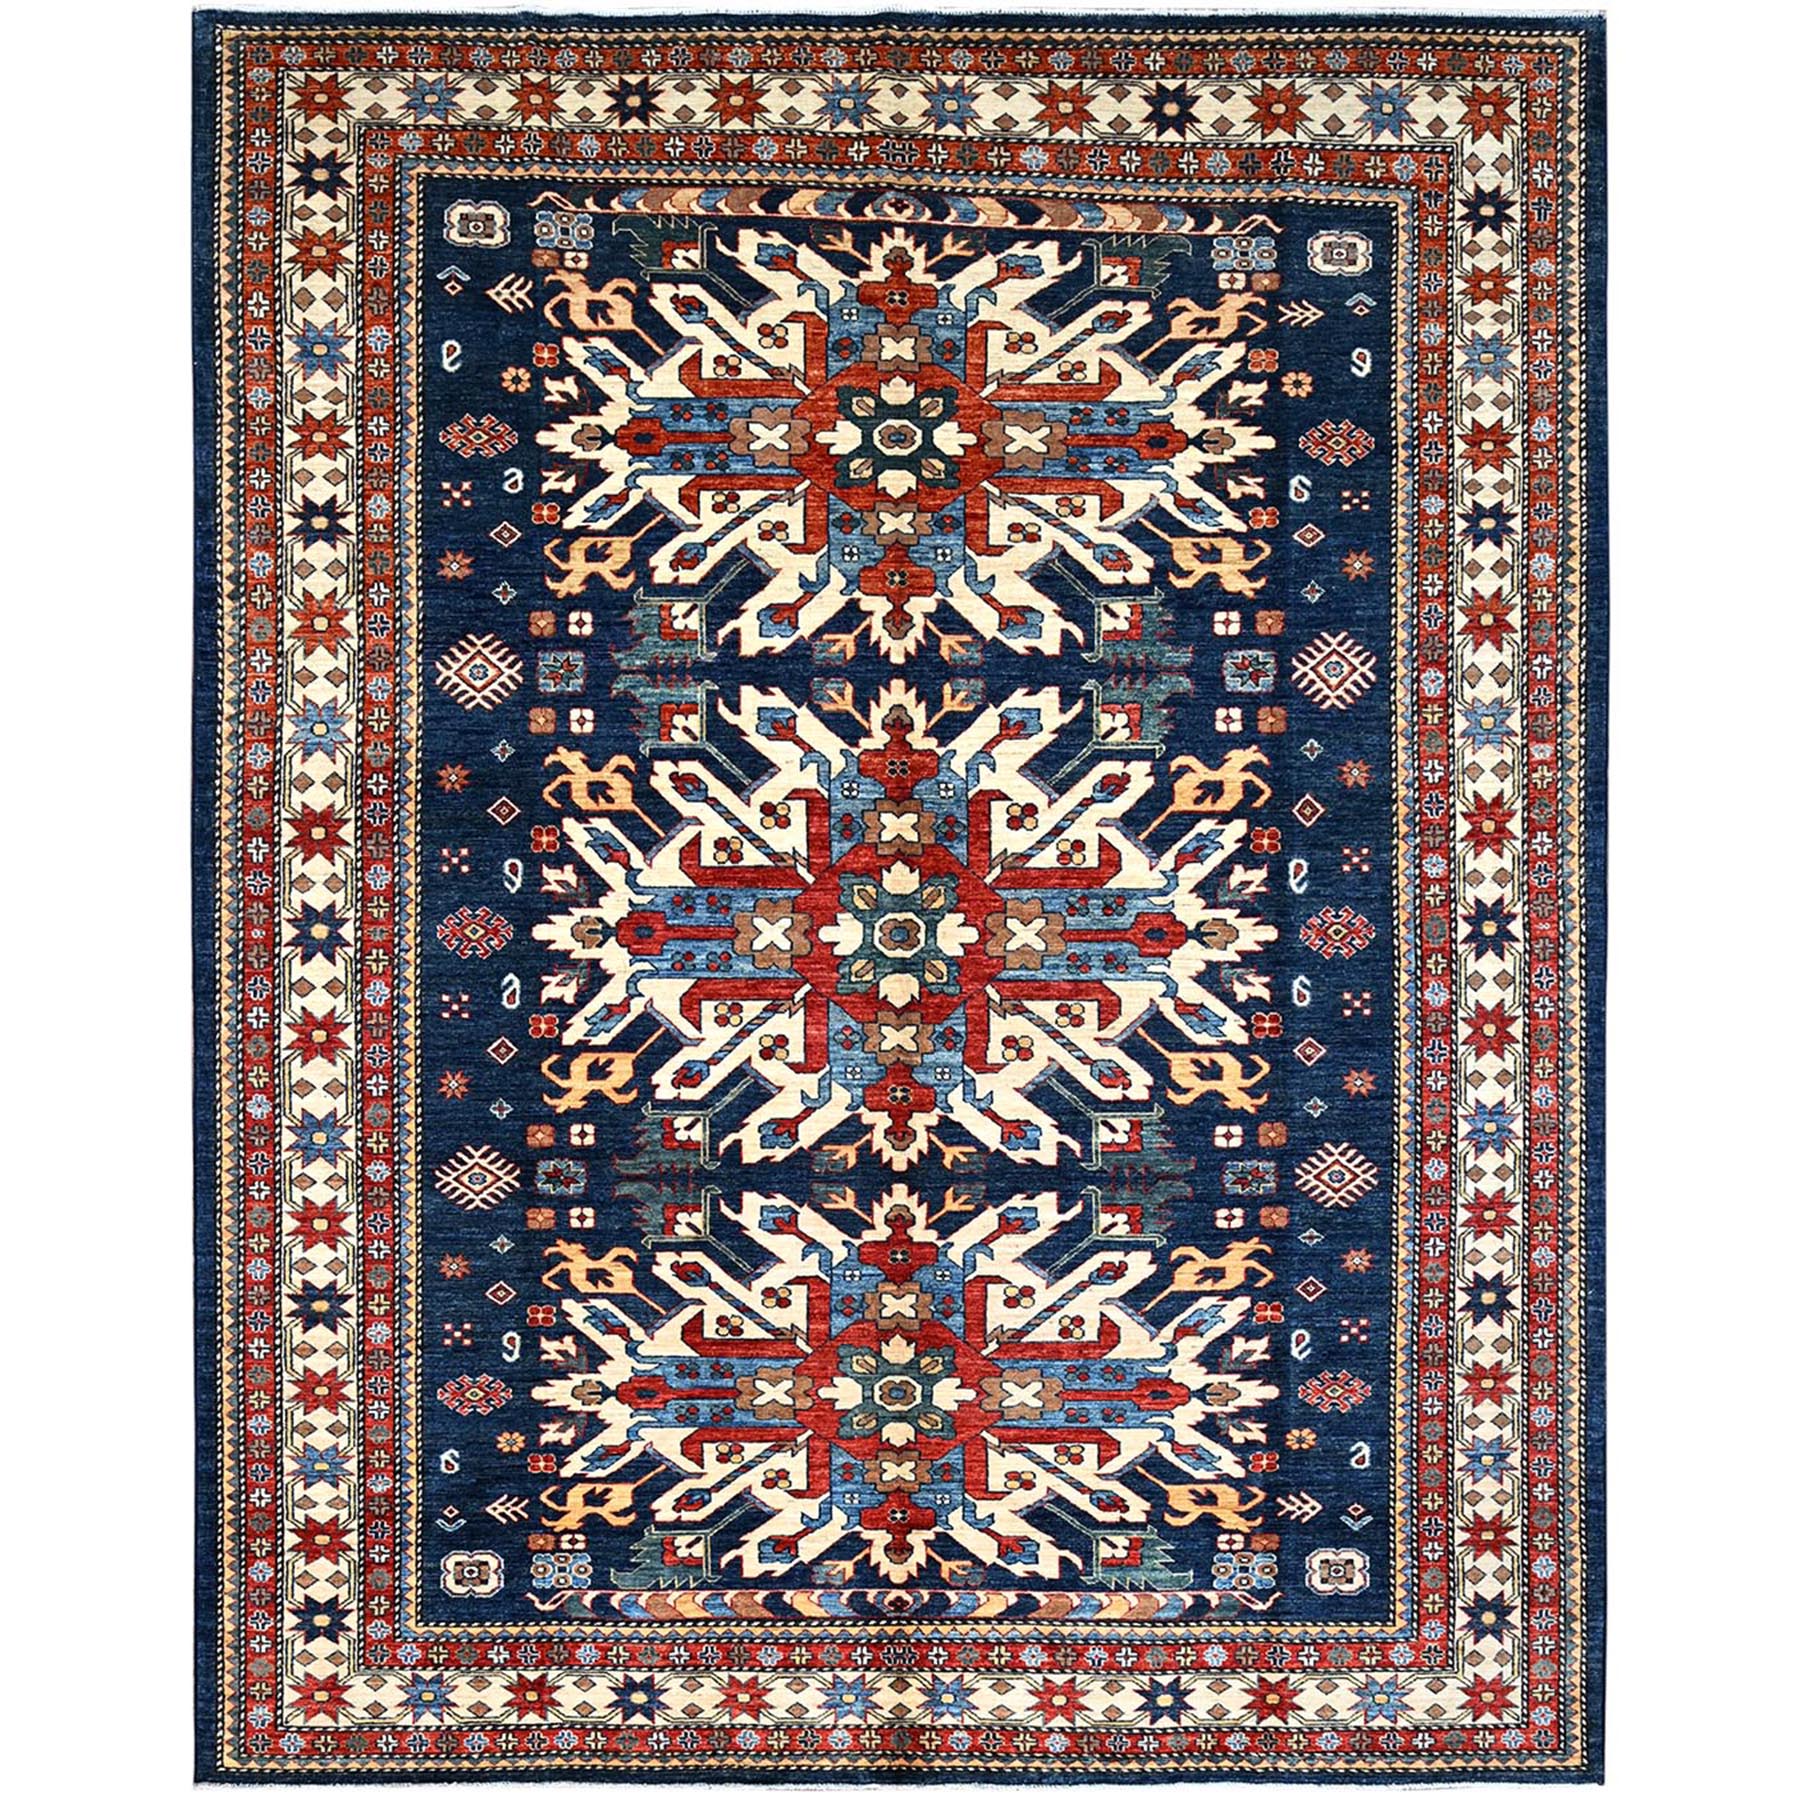 Opal Blue, Vegetable Dyes, 100% Wool, Afghan Eagle Super Kazak with Geometric Medallions, Hand Knotted, Oriental Rug